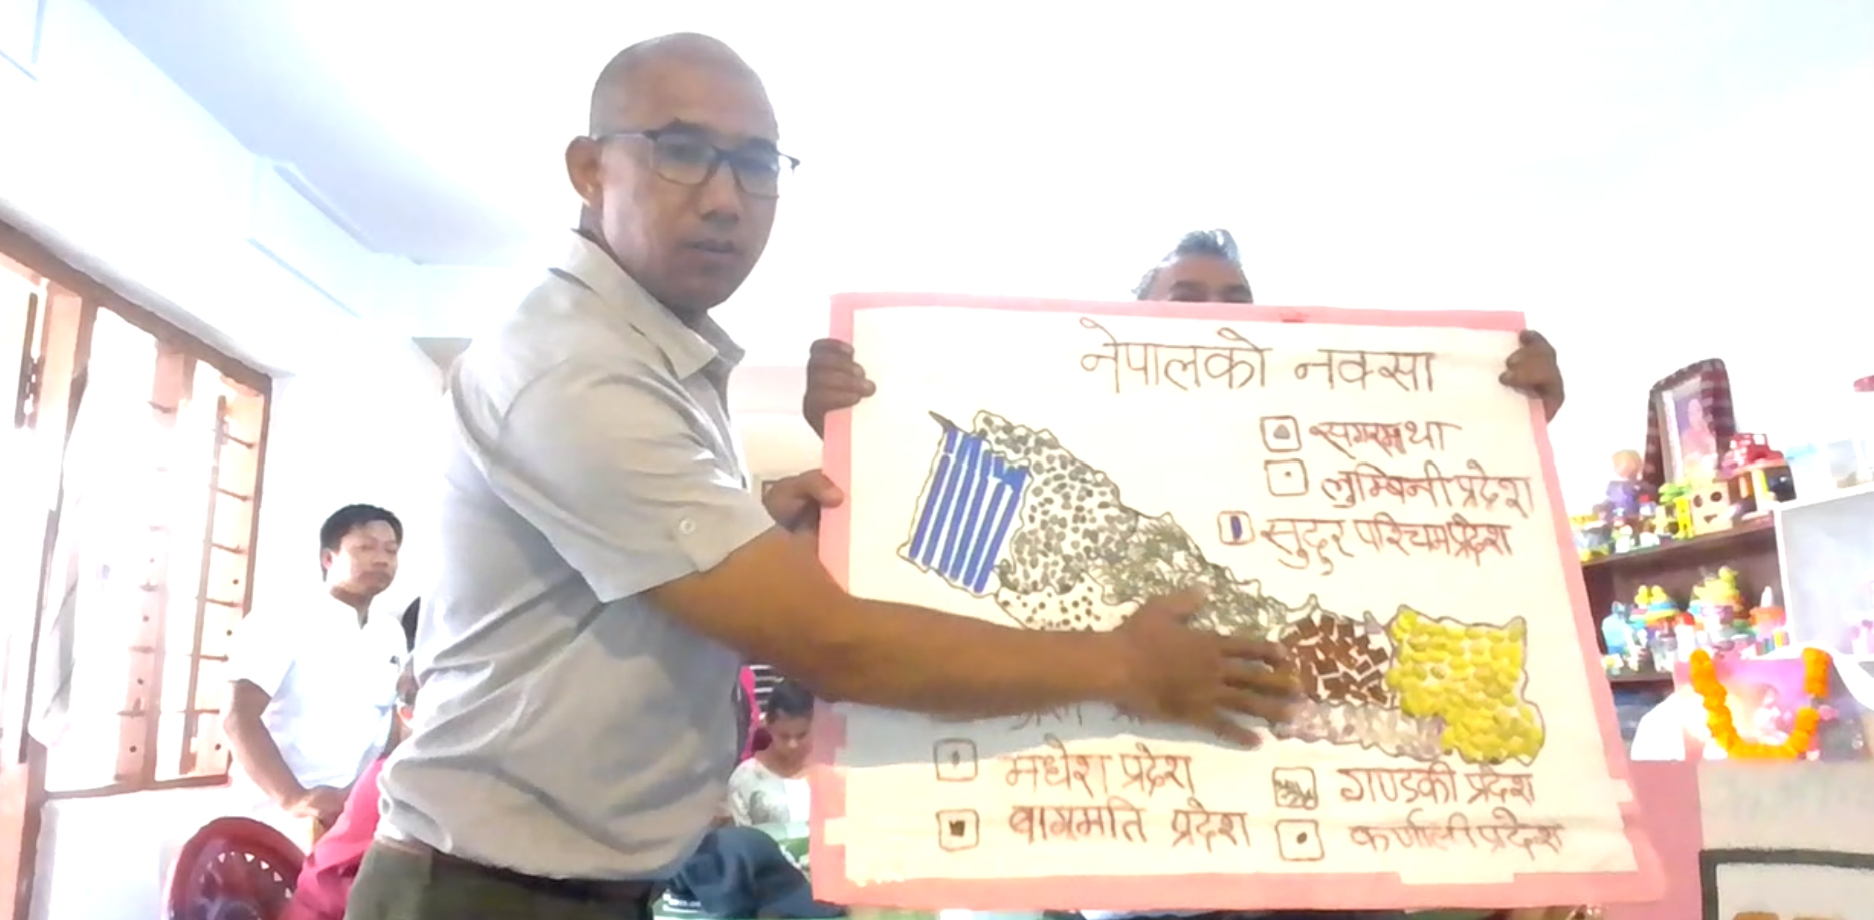 The President of the Parents' Association, Lakpa Nuru Sherpa, presents a tactile map of Nepal.